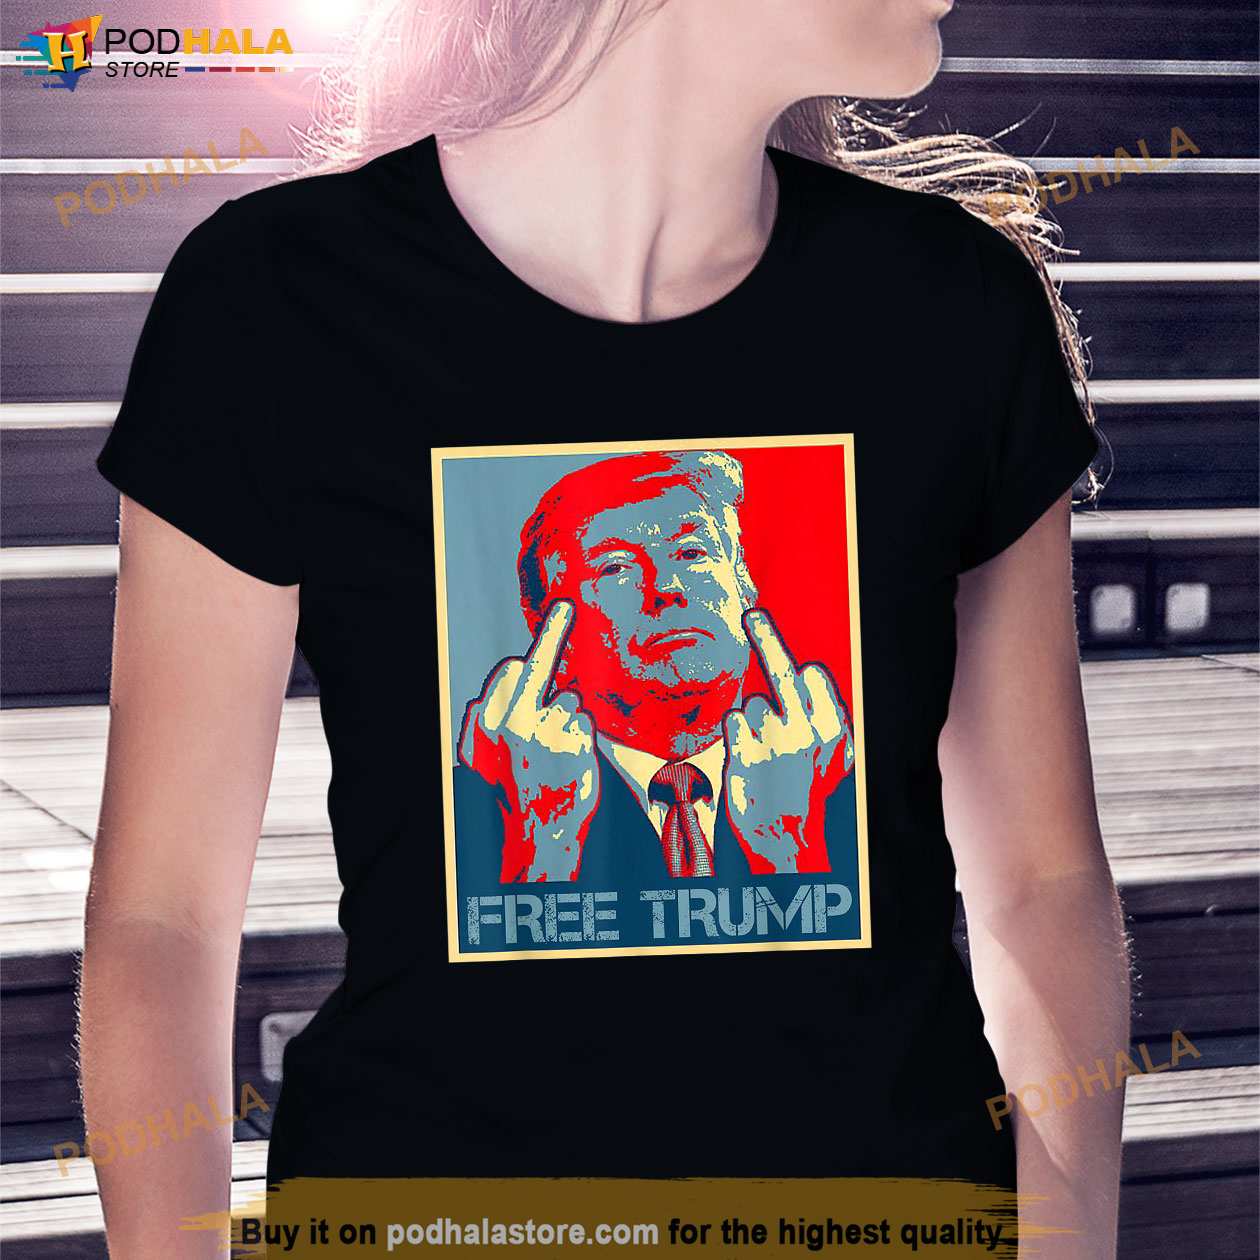 Free Trump Middle Finger Republican Support T-Shirt, Funny Donald Trump Shirts - Bring Your Ideas, Thoughts And Imaginations Into Today